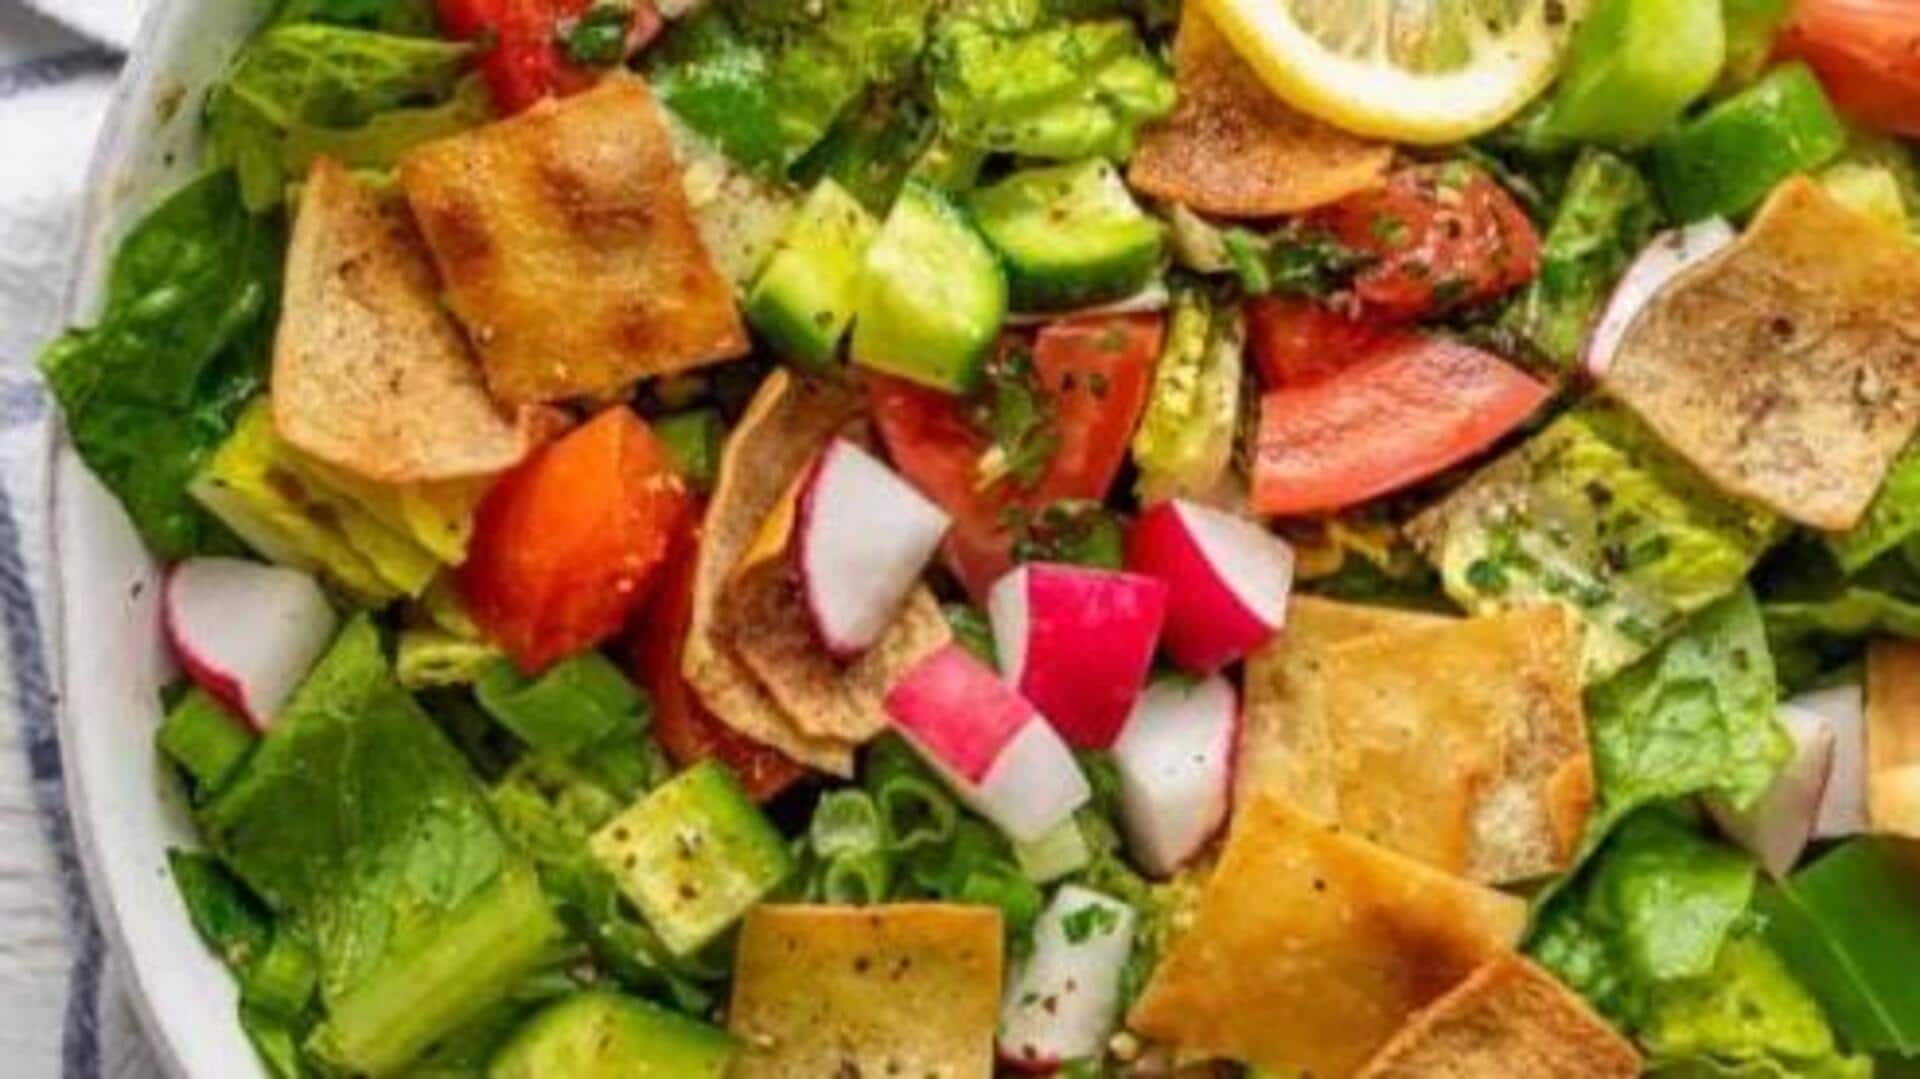 Try this Lebanese fattoush salad recipe at home